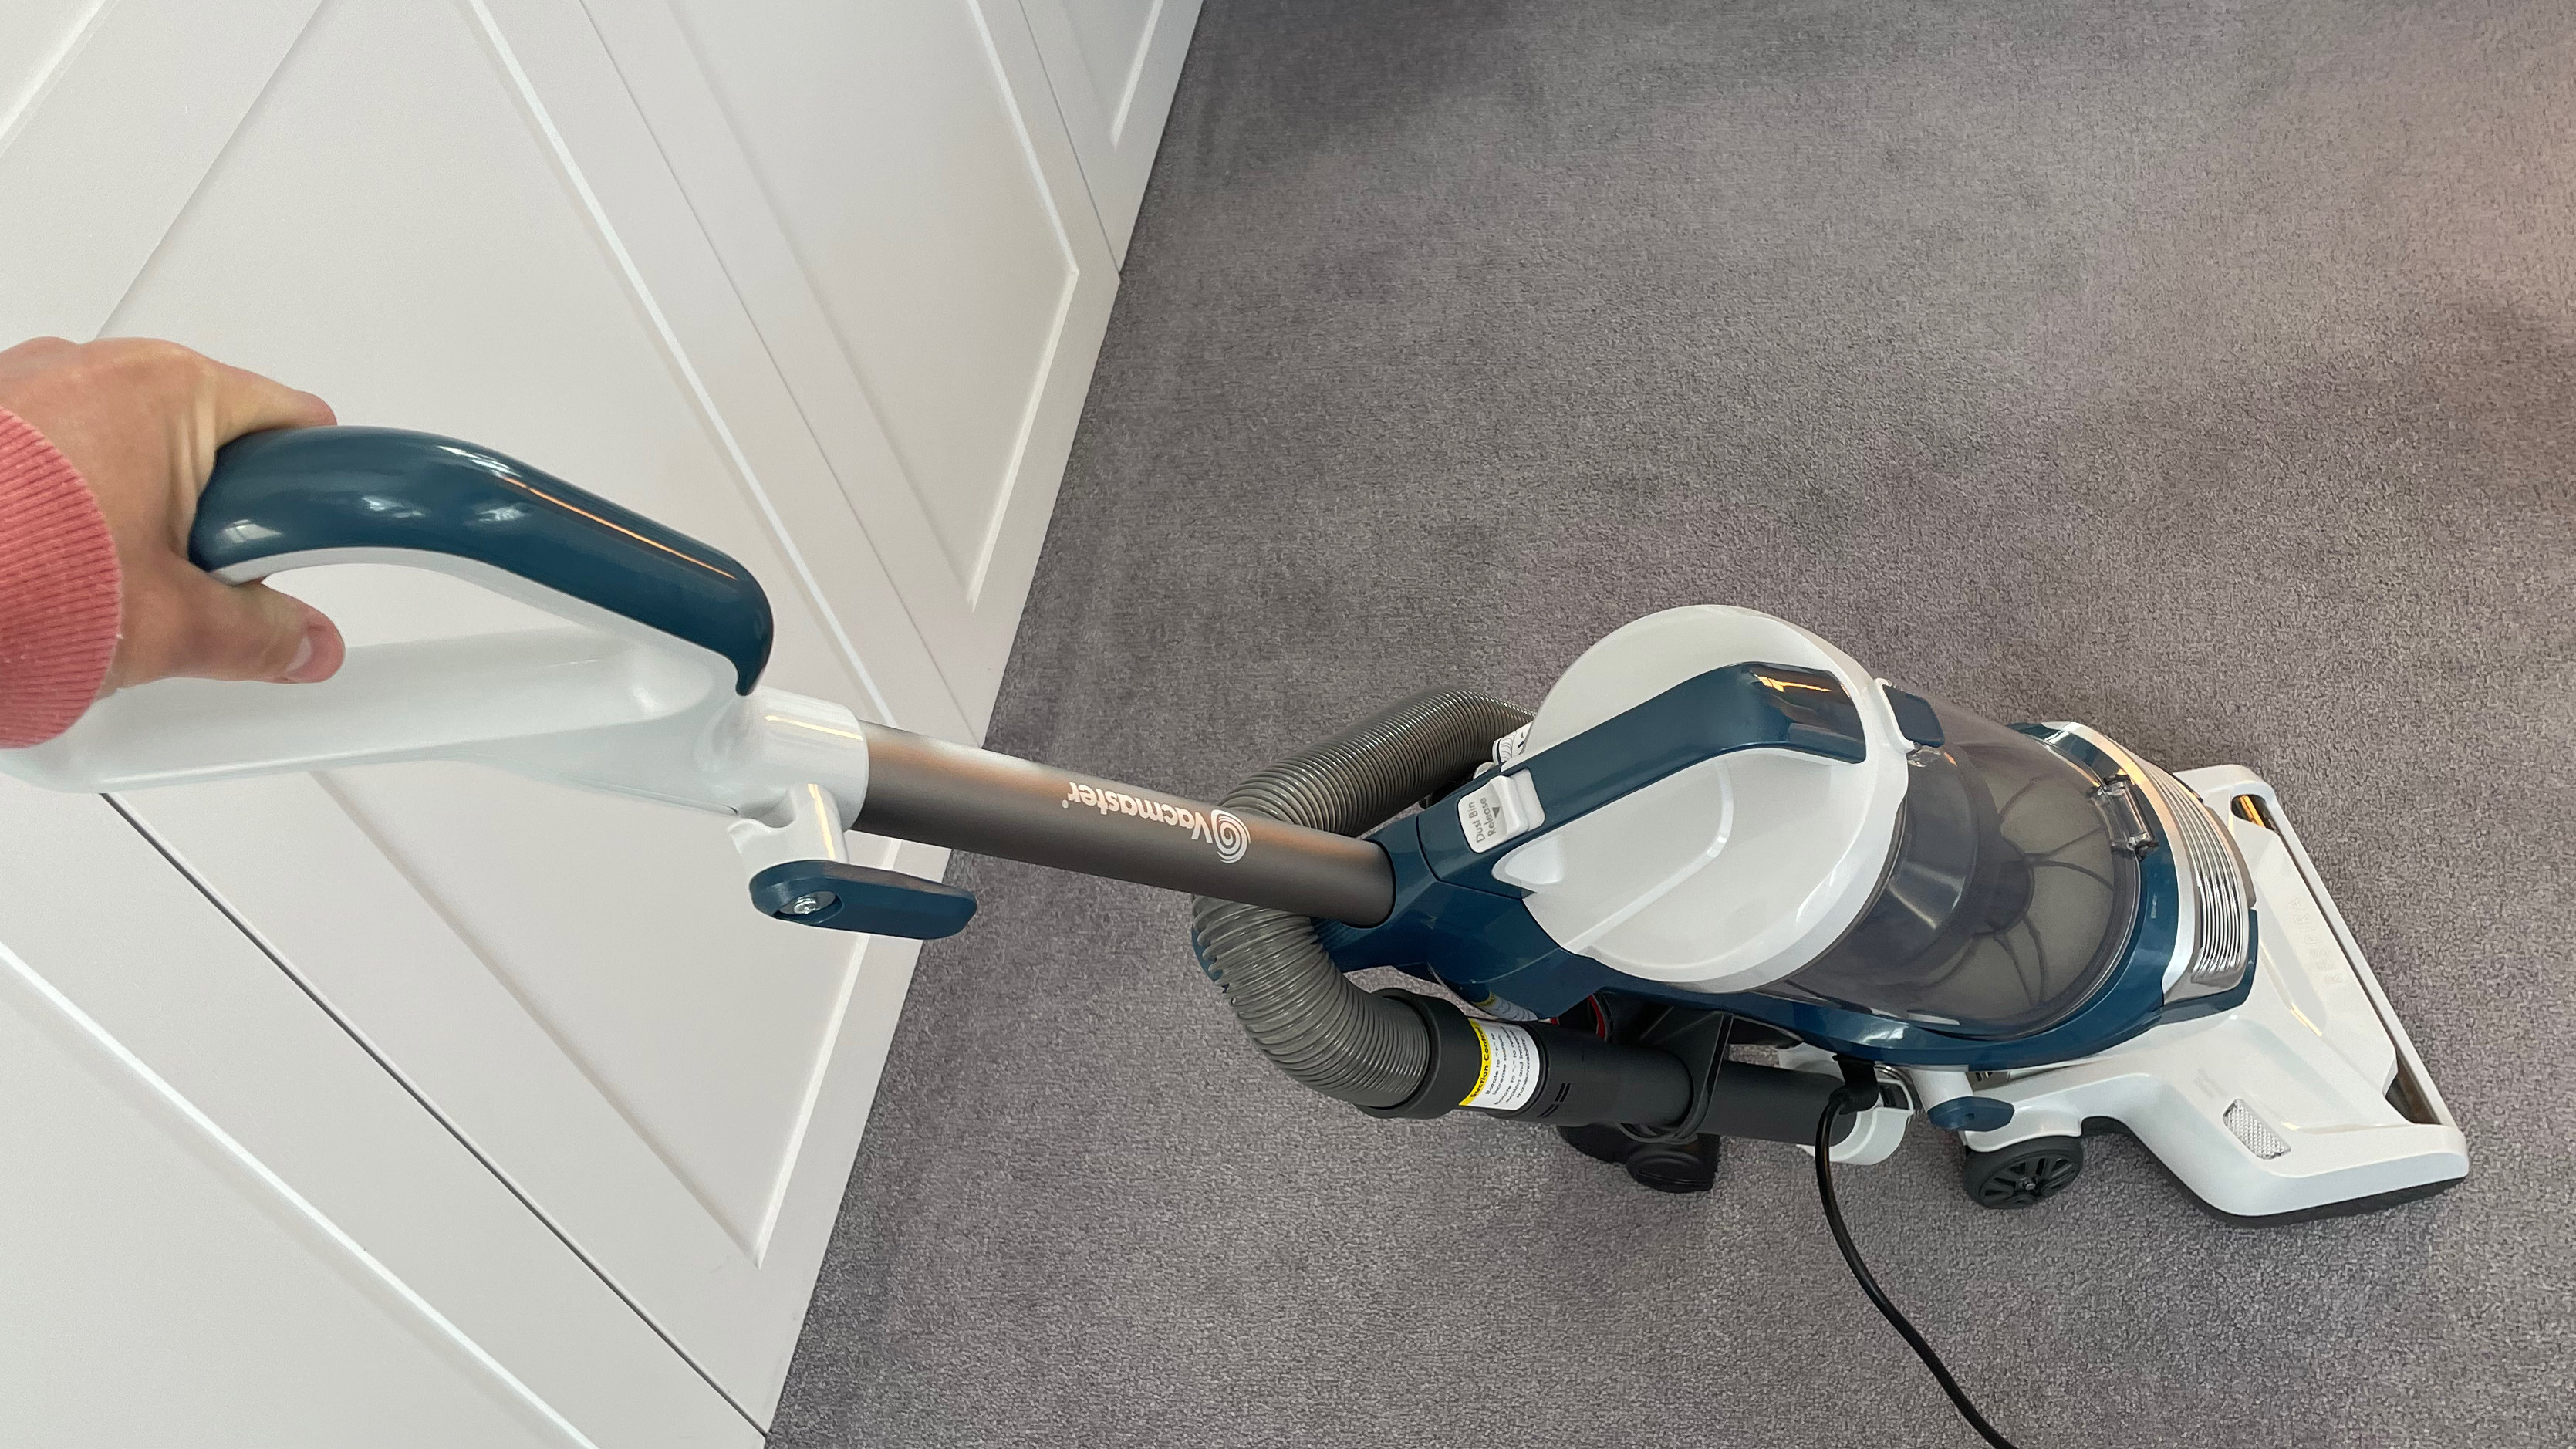 The Vacmaster Respira Pet Upright Vacuum UC0413EUK being used to cleaning carpet